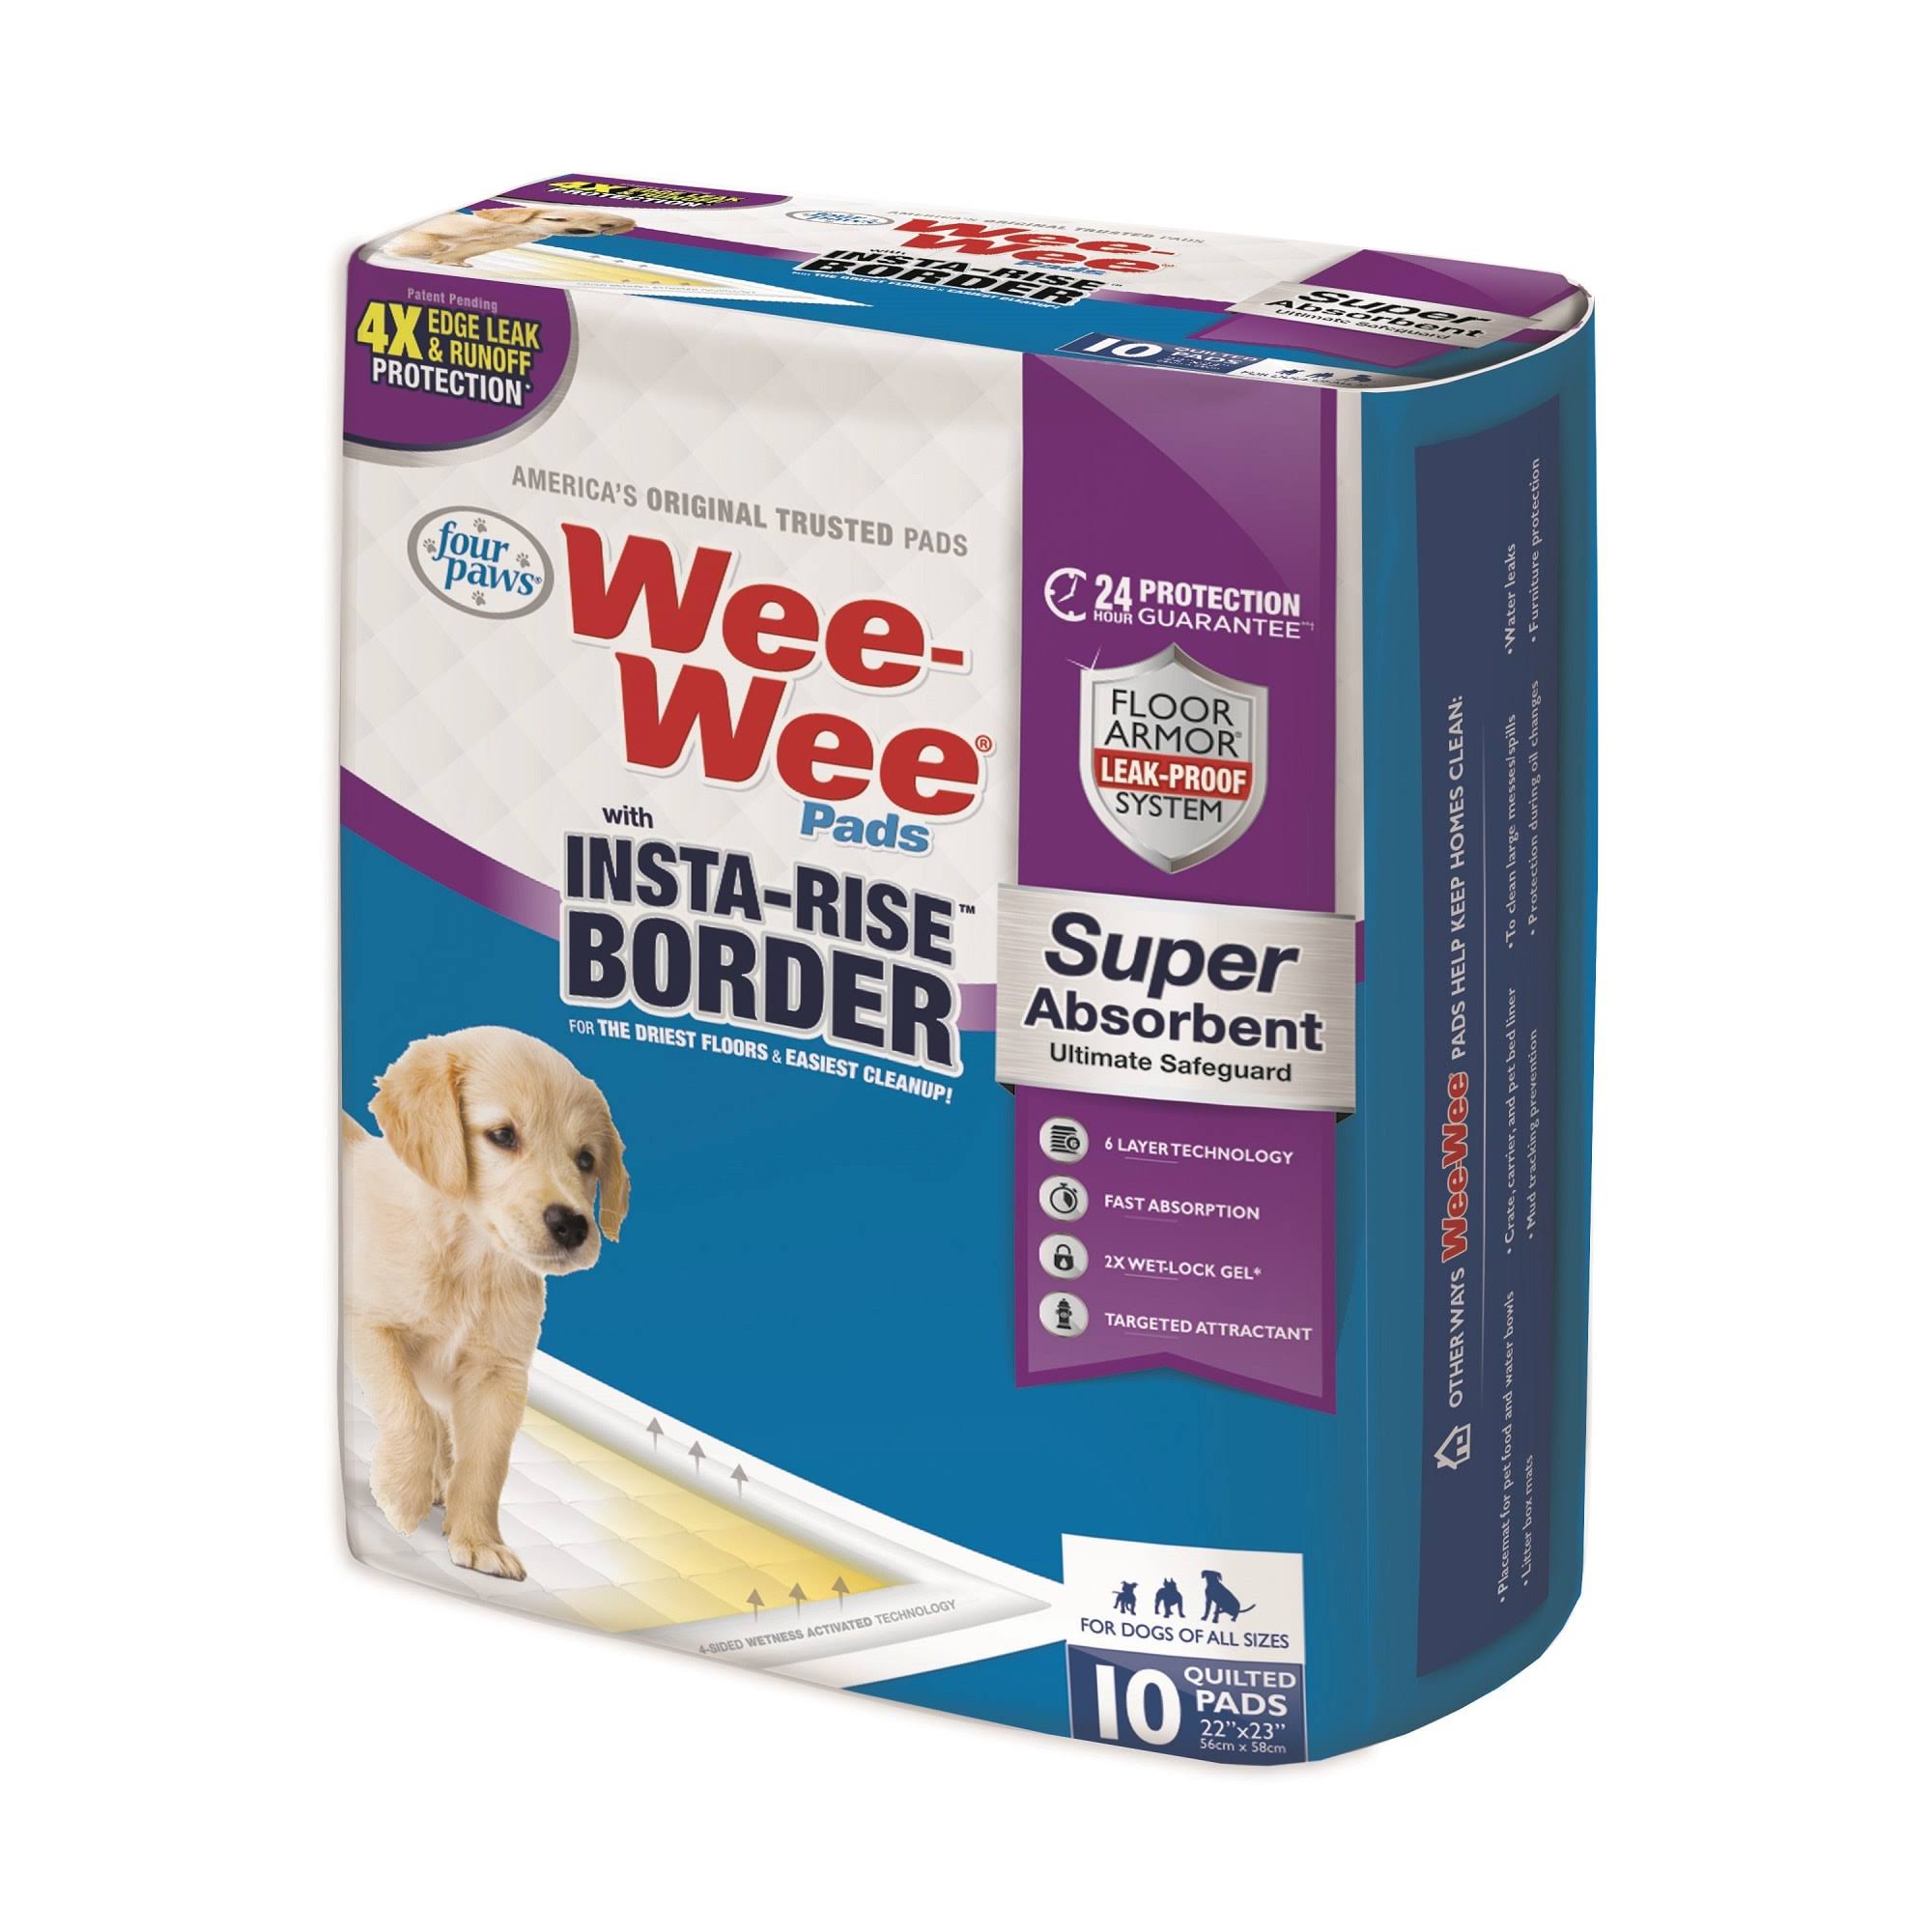 Four Paws Wee-wee Insta-rise Border Pad - 10ct, 22" x 23"